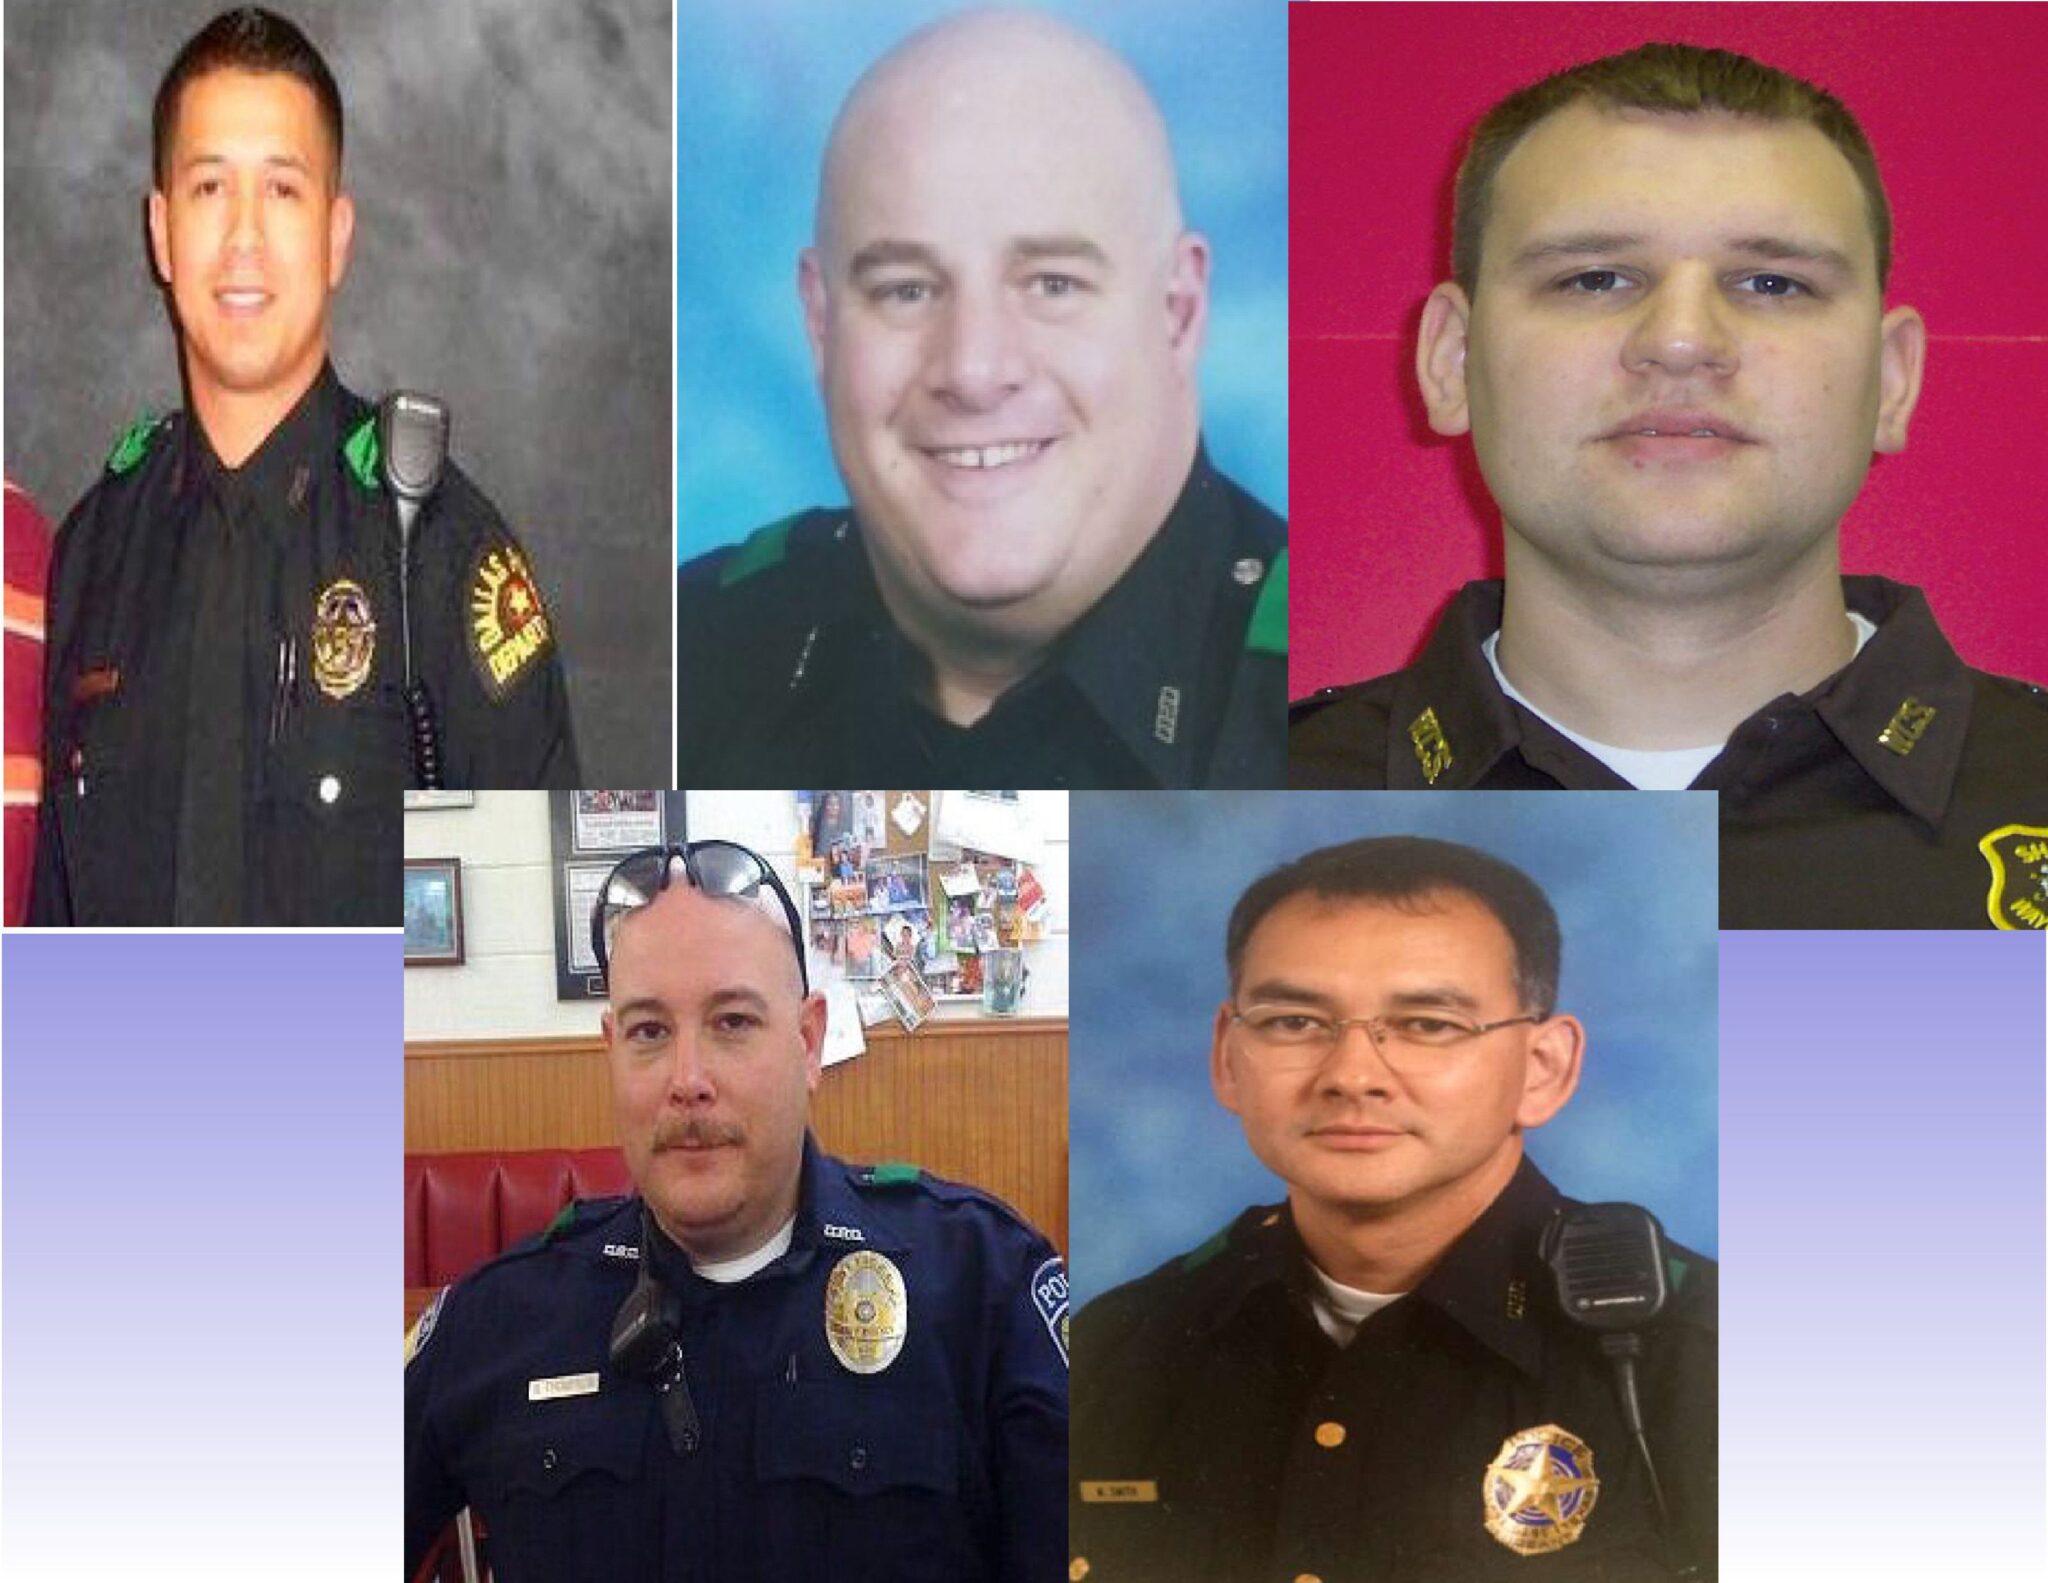 Police Officer Patrick Zamarripa, Senior Corporal Lorne Ahrens, Police Officer Michael Krol, Sergeant Michael Smith, of the Dallas Police Department and Police Officer Brent Thompson, of the Dallas Area Rapid Transit Police Department, were shot and killed by an active shooter during a protest in downtown Dallas.